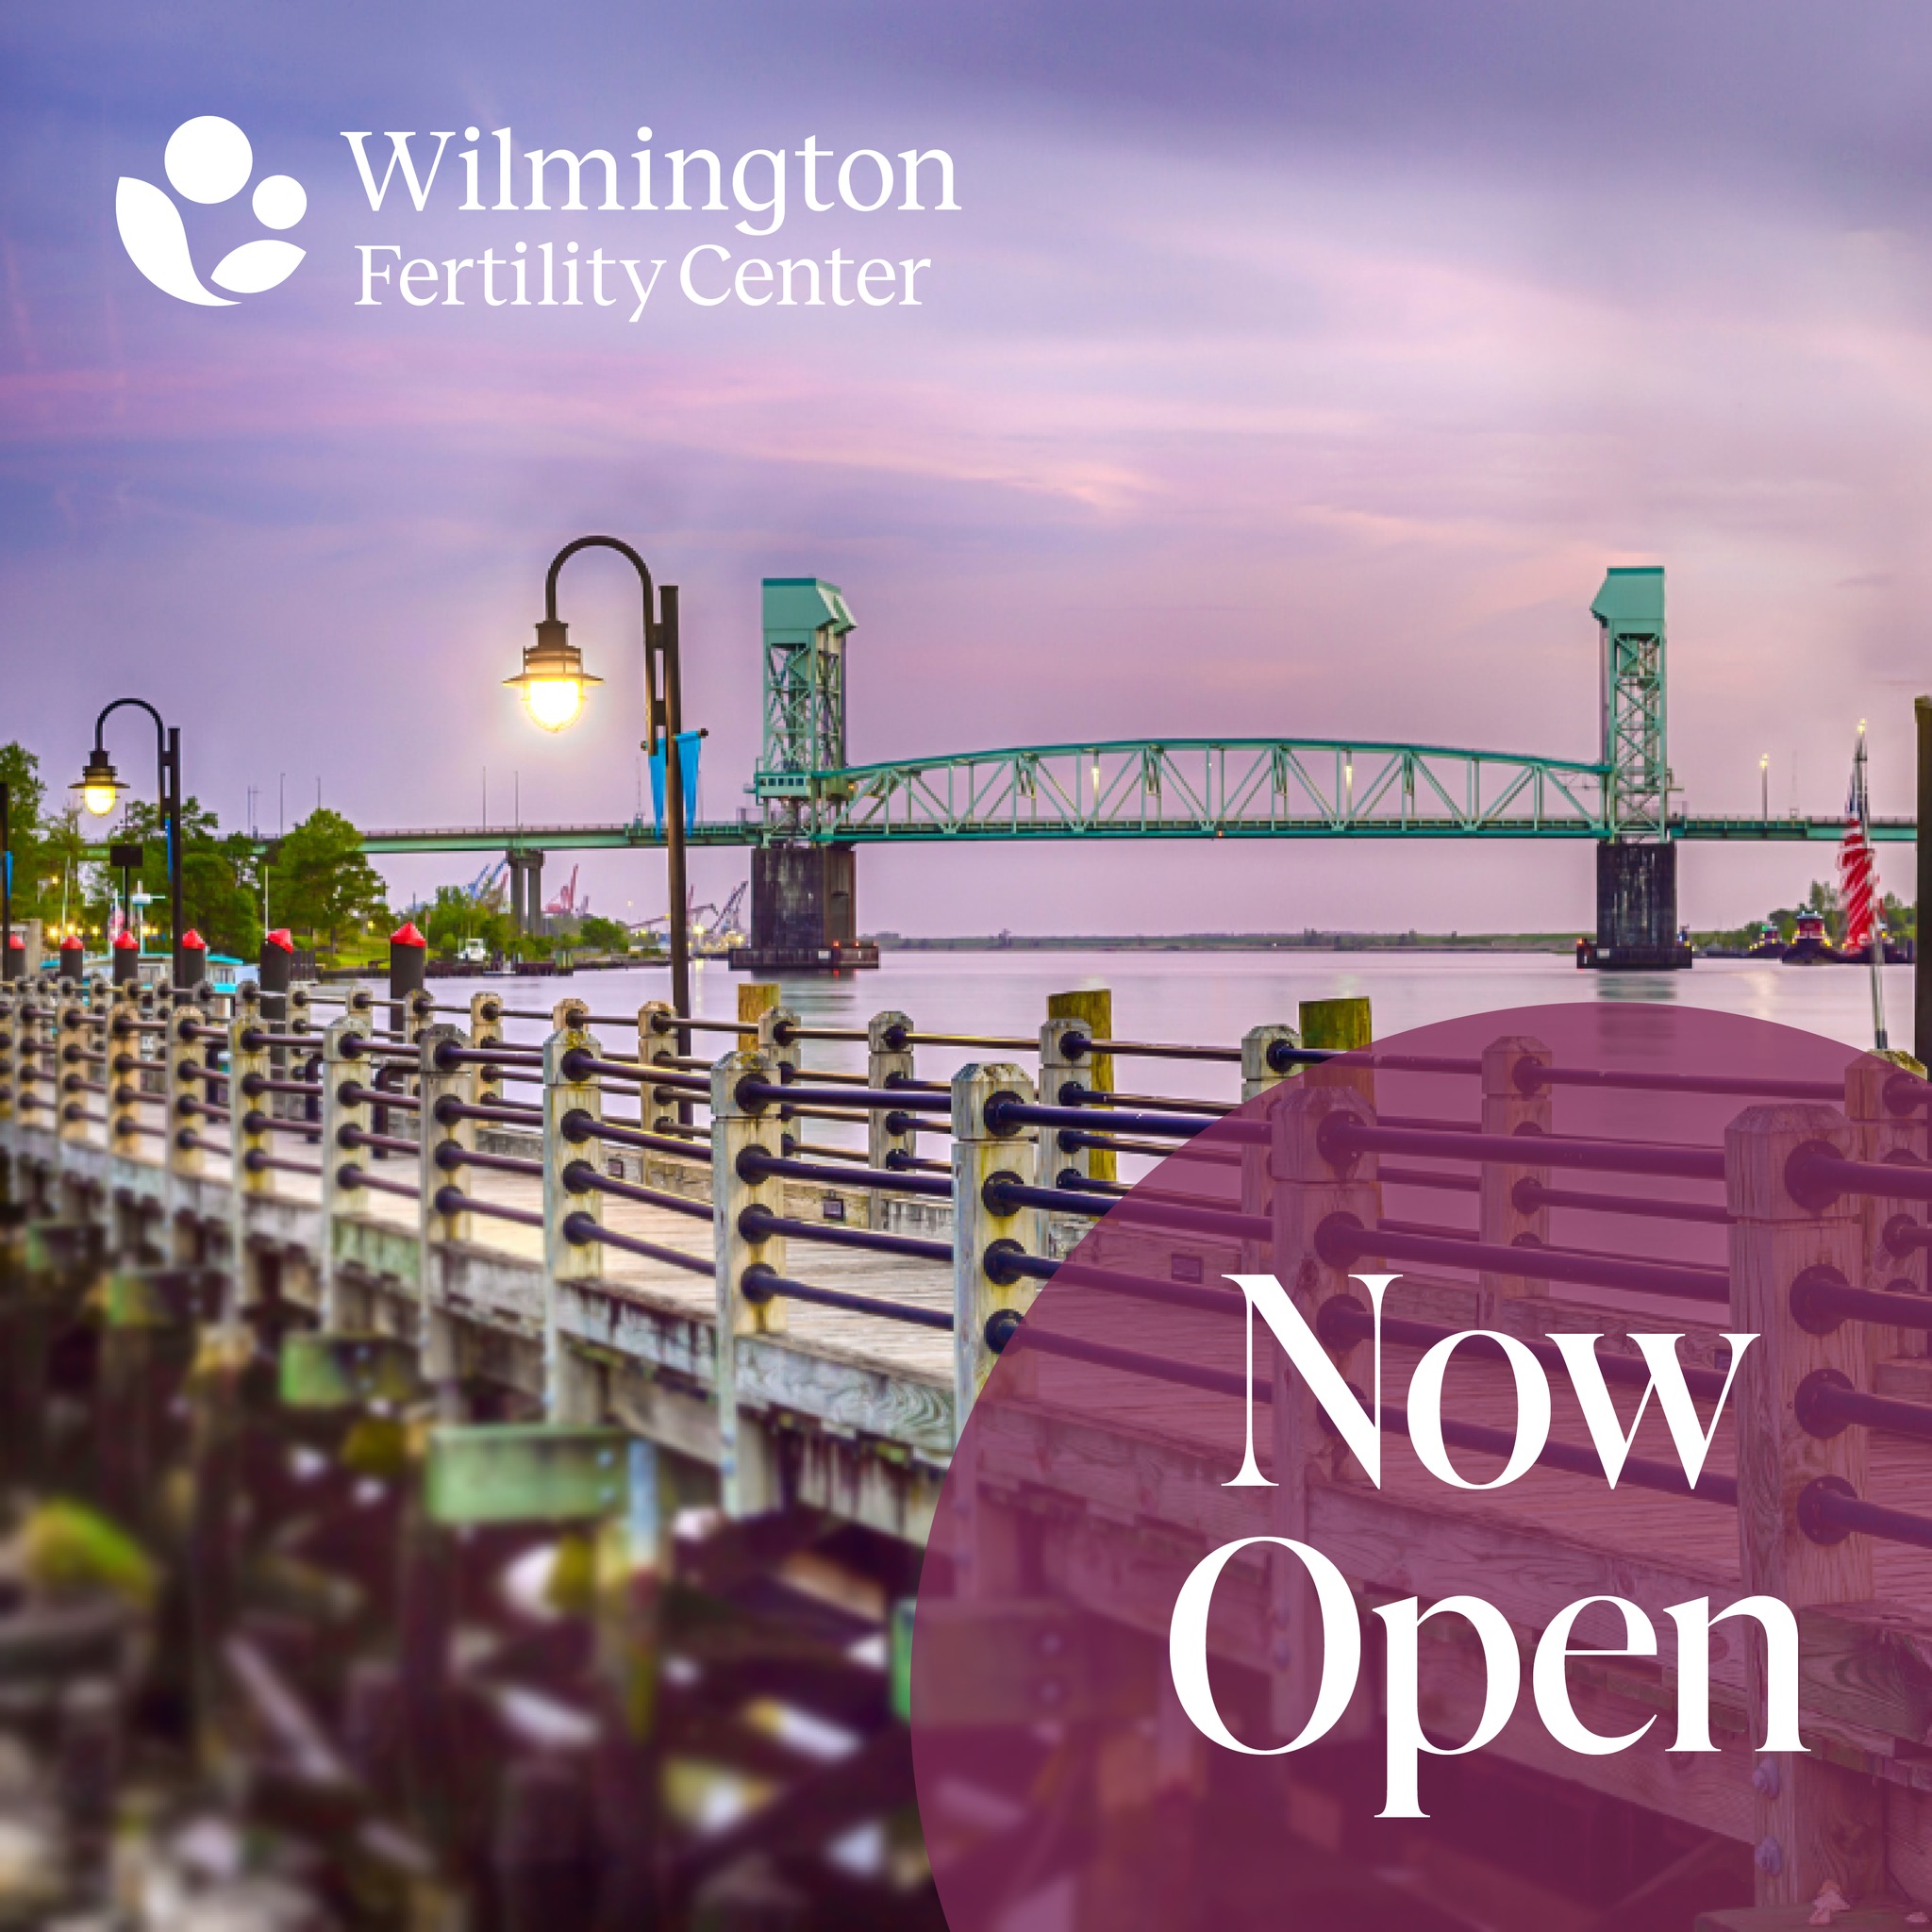 Wilmington Fertility Center Opens; Becomes the Only IVF Center in Wilmington, North Carolina